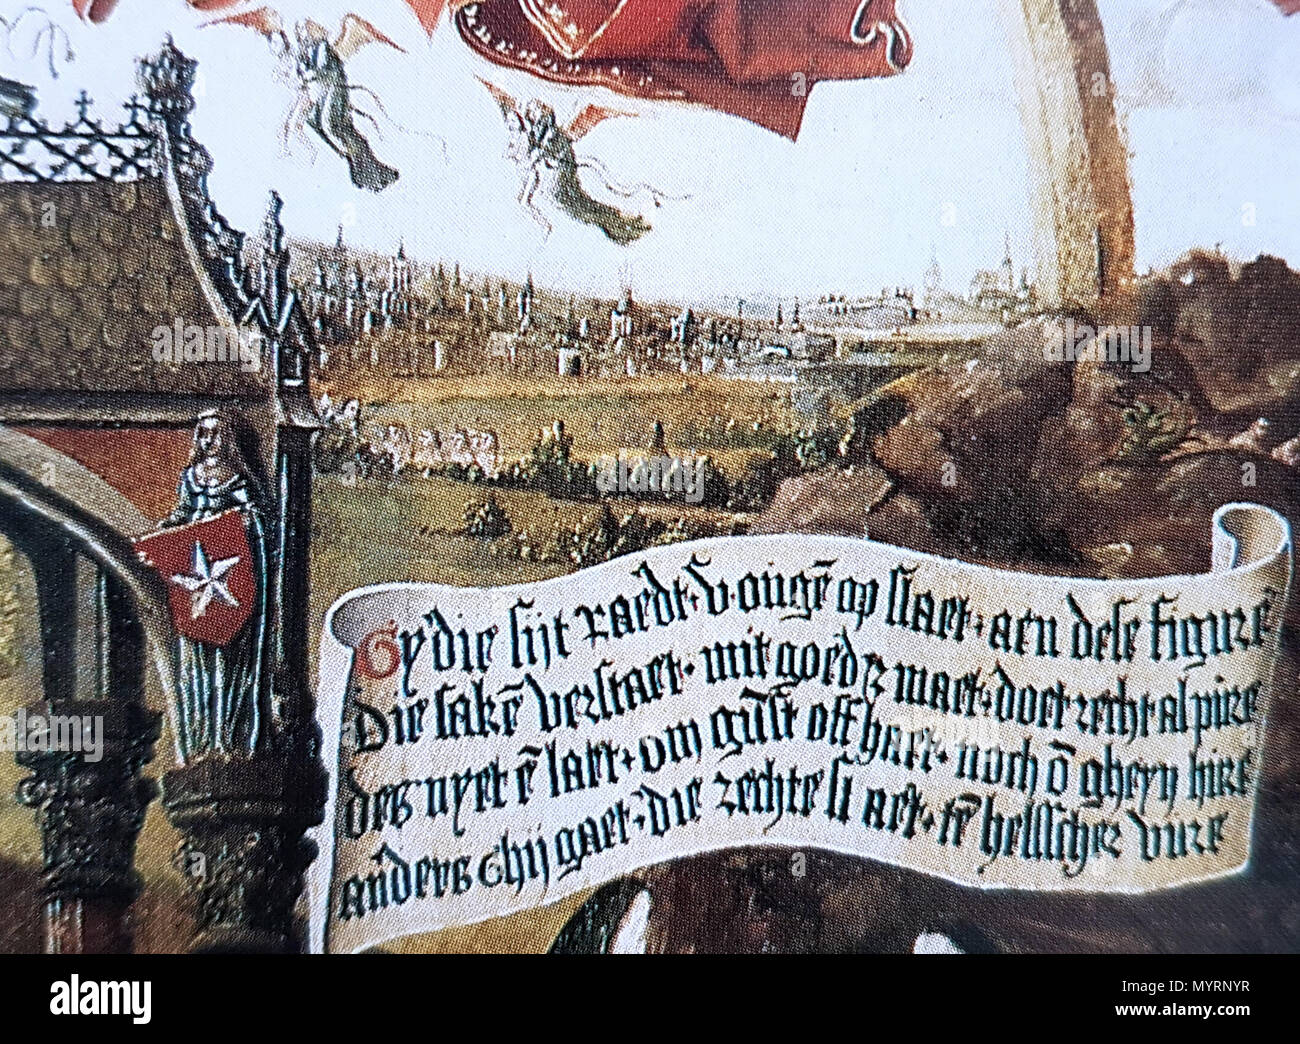 . English: View of the town of Maastricht, a virgin holding the coat of arms of maastricht and a written admonishment to judges to be honest and fair. Detail of a painting Justice dispensed by Jan van Brussel (1499). This painting once hung in Dinghuis, the Medieval courthouse in Maastricht, the Netherlands. It now hangs in the town hall.  . 16 July 2016, 09:56:32. Jan van Brussel, 1499 10 Gerechtigheidstafereel, Stadhuis v Maastricht (J v Brussel, 1499) - detail Stock Photo